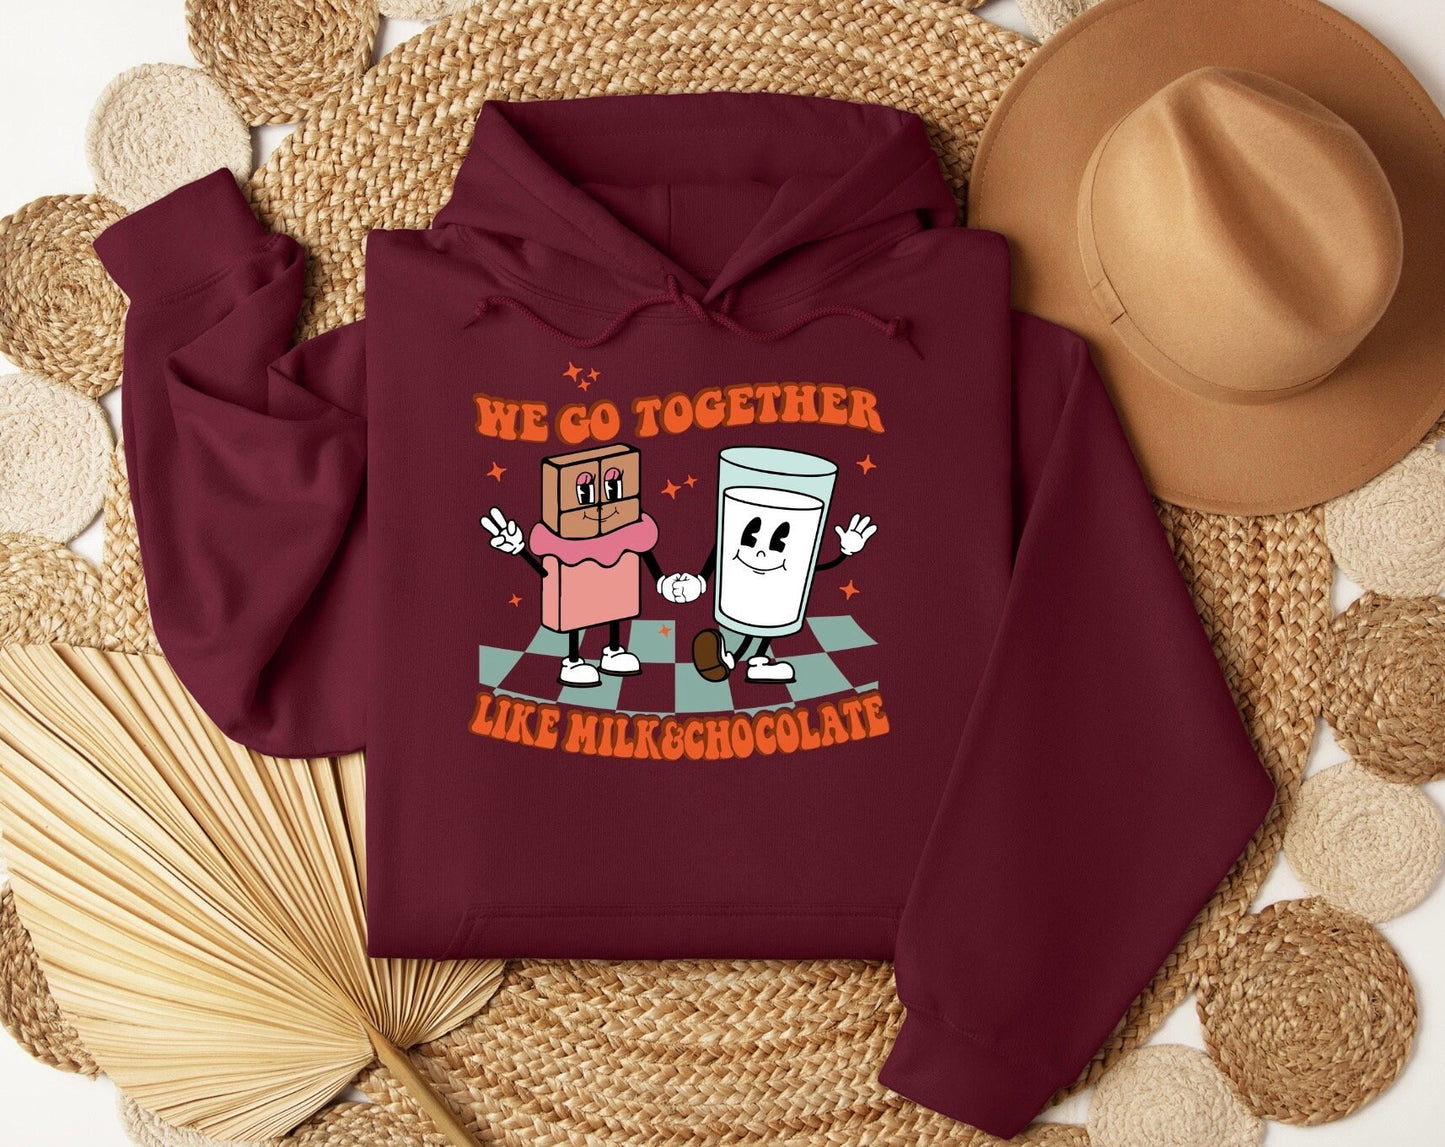 We Go Together Hoodie, We Go Together Sweater, We Go Together Sweatshirt, We Go Together Crewneck, We Go Together Tshirt, We Go Together Tee